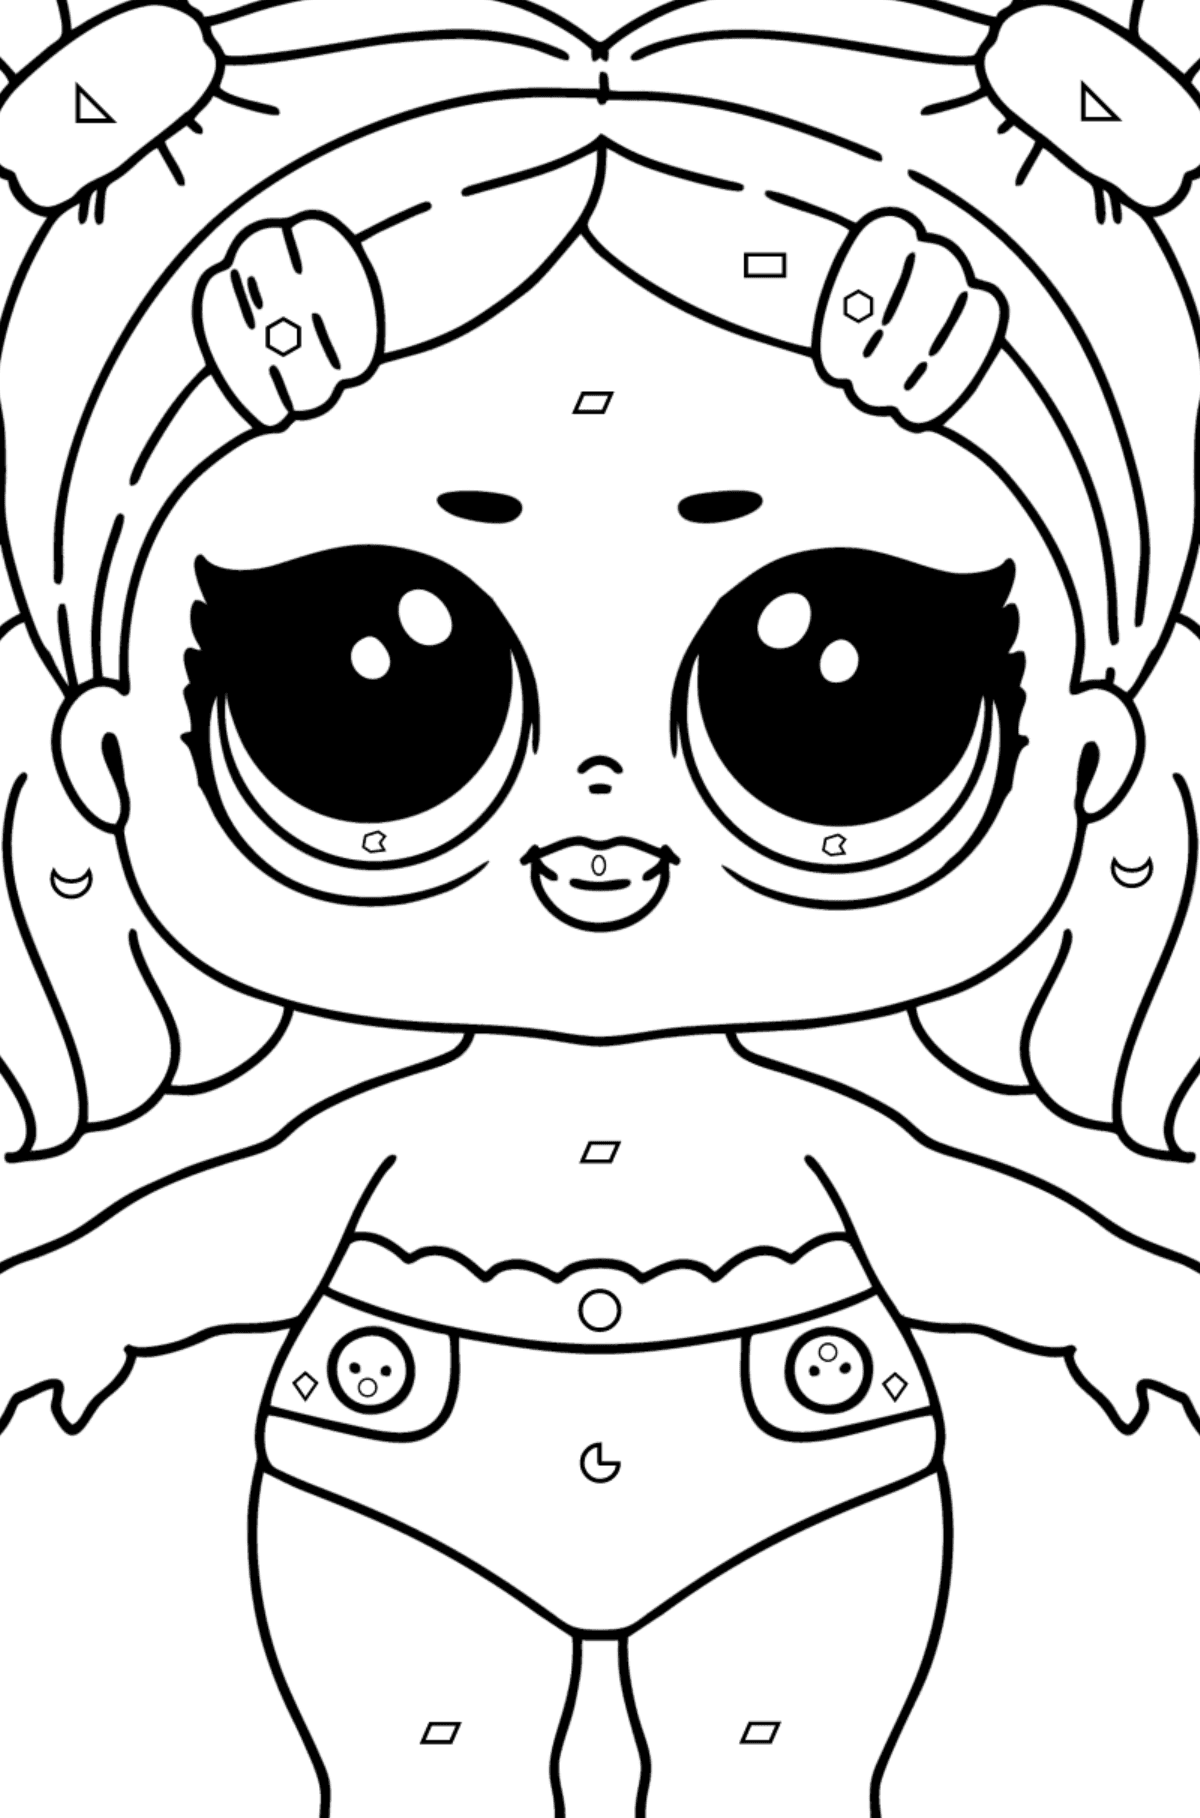 Coloring page LOL LIL Dusk - Coloring by Geometric Shapes for Kids